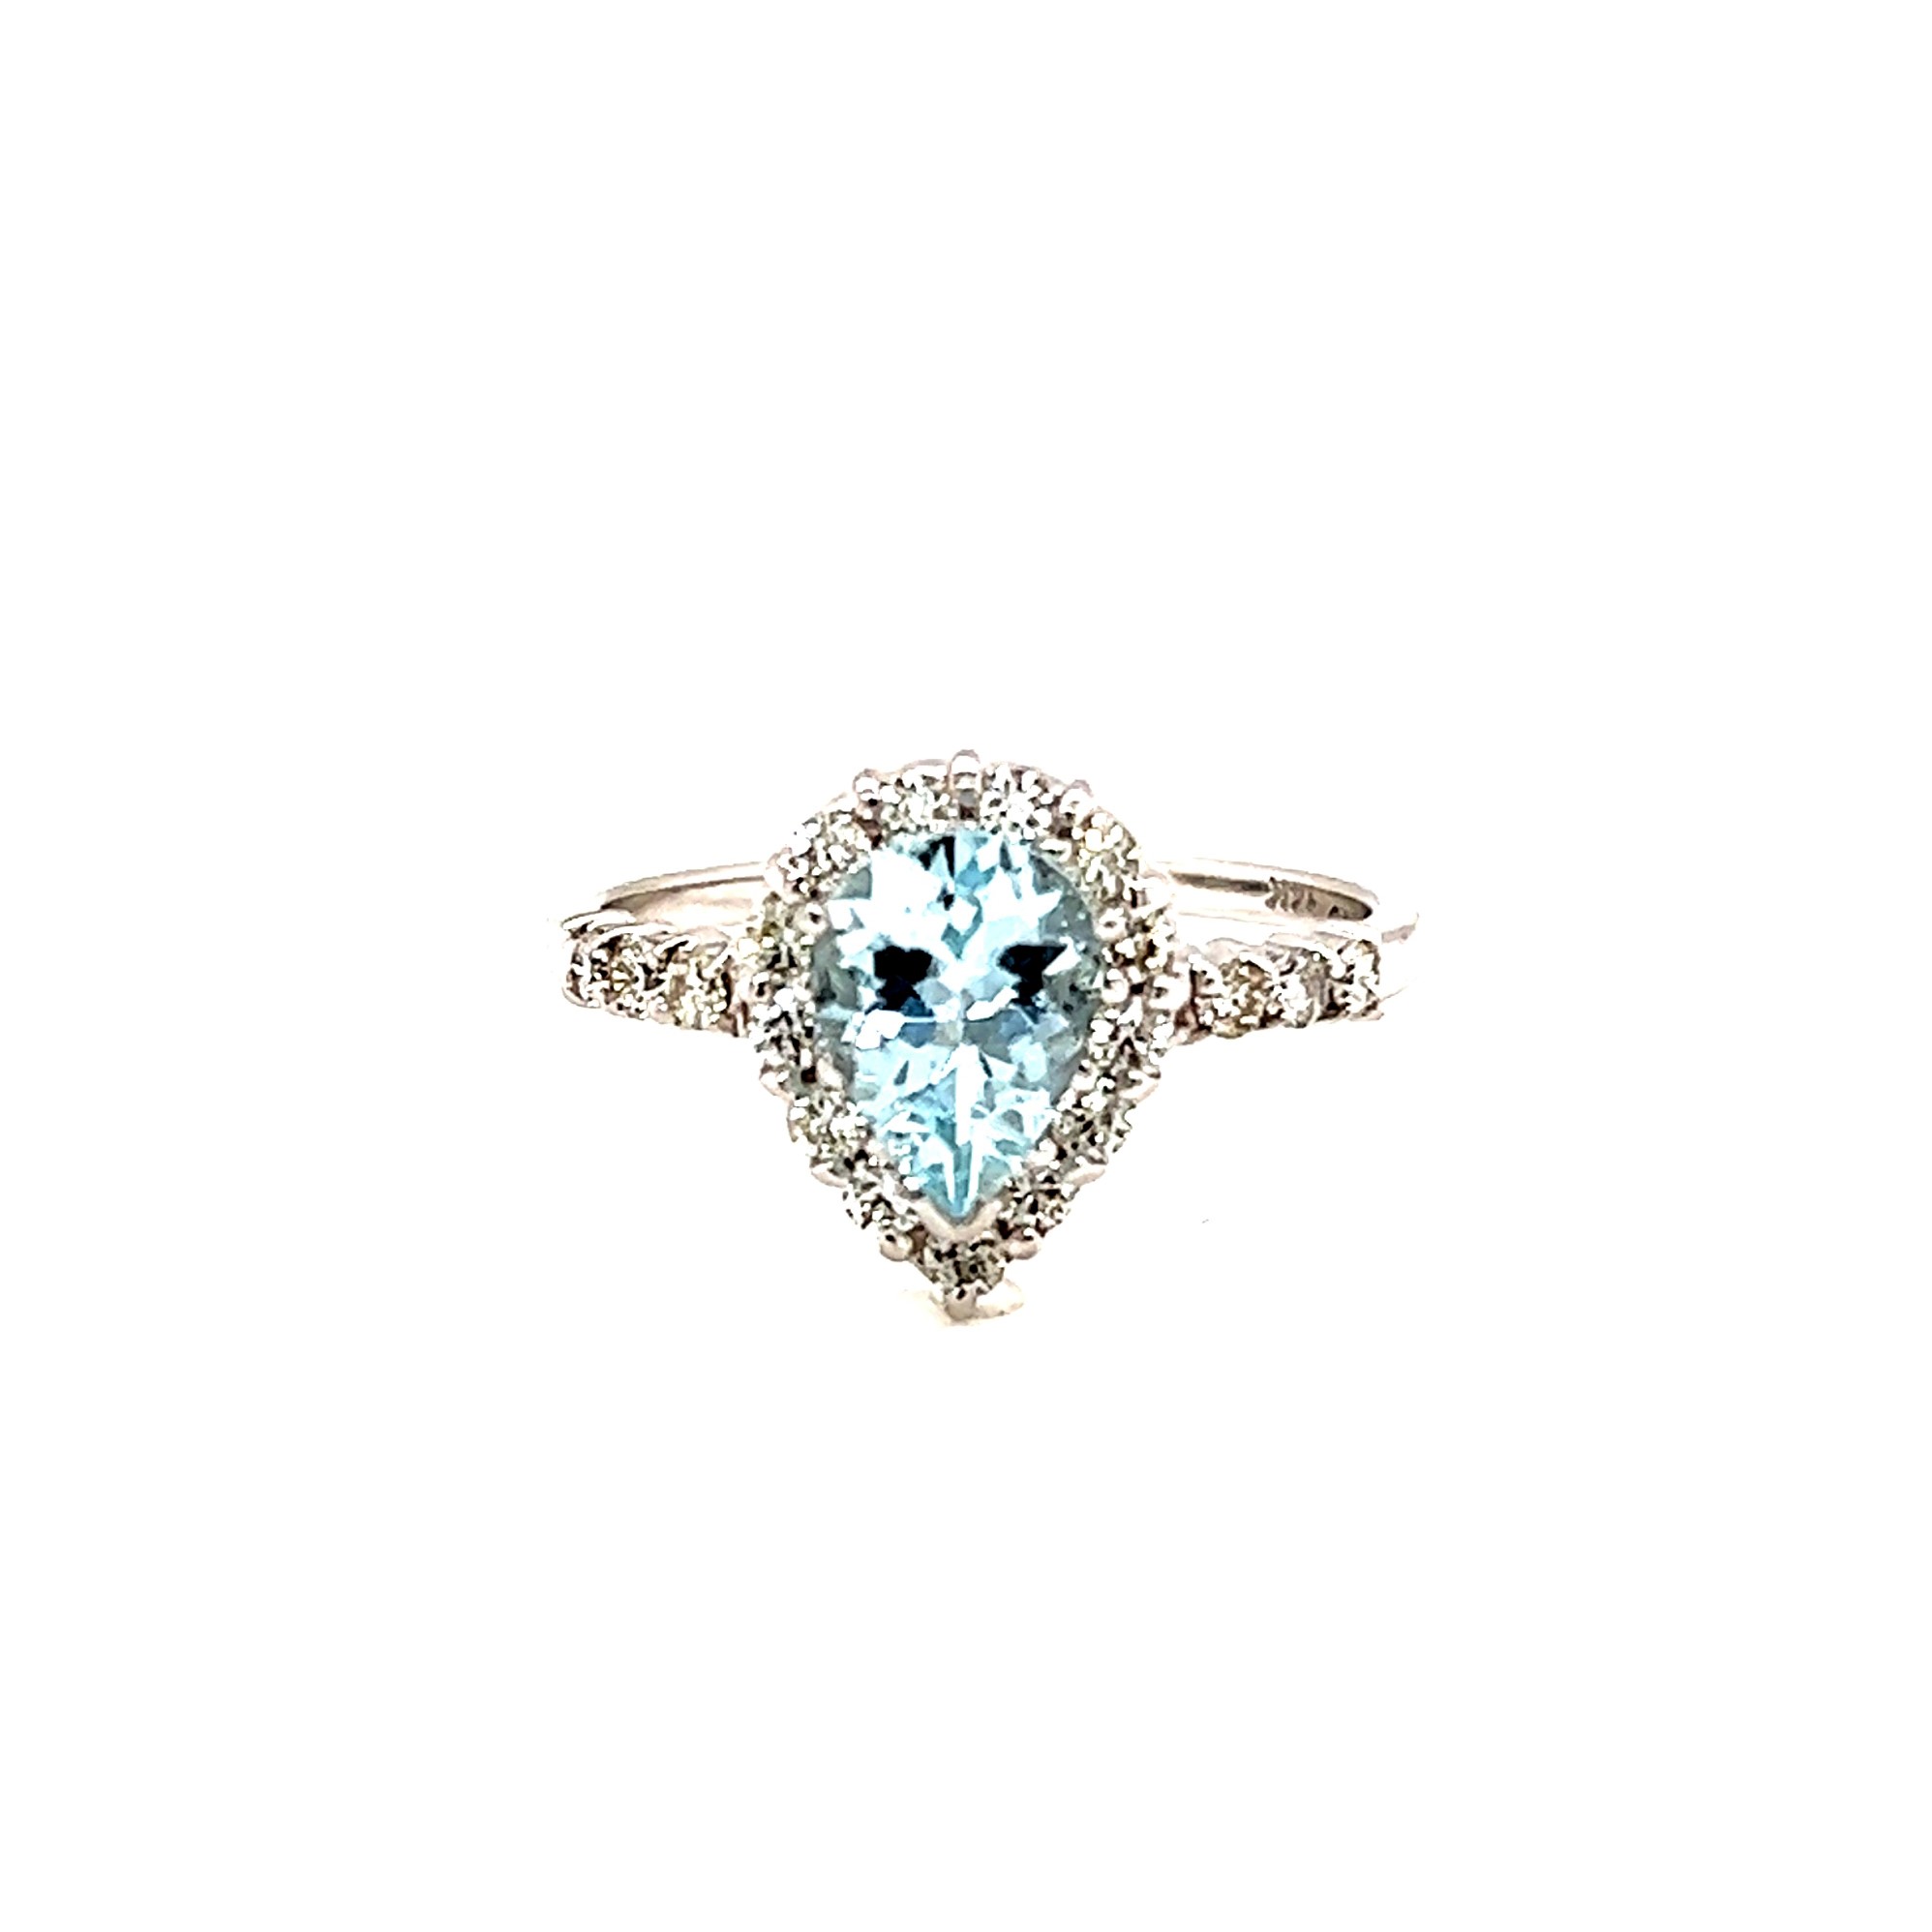 14 Karat White Gold Ring With 19=0.45TW Round Brilliant G SI Diamonds And One 0.90CT Pear Aqua